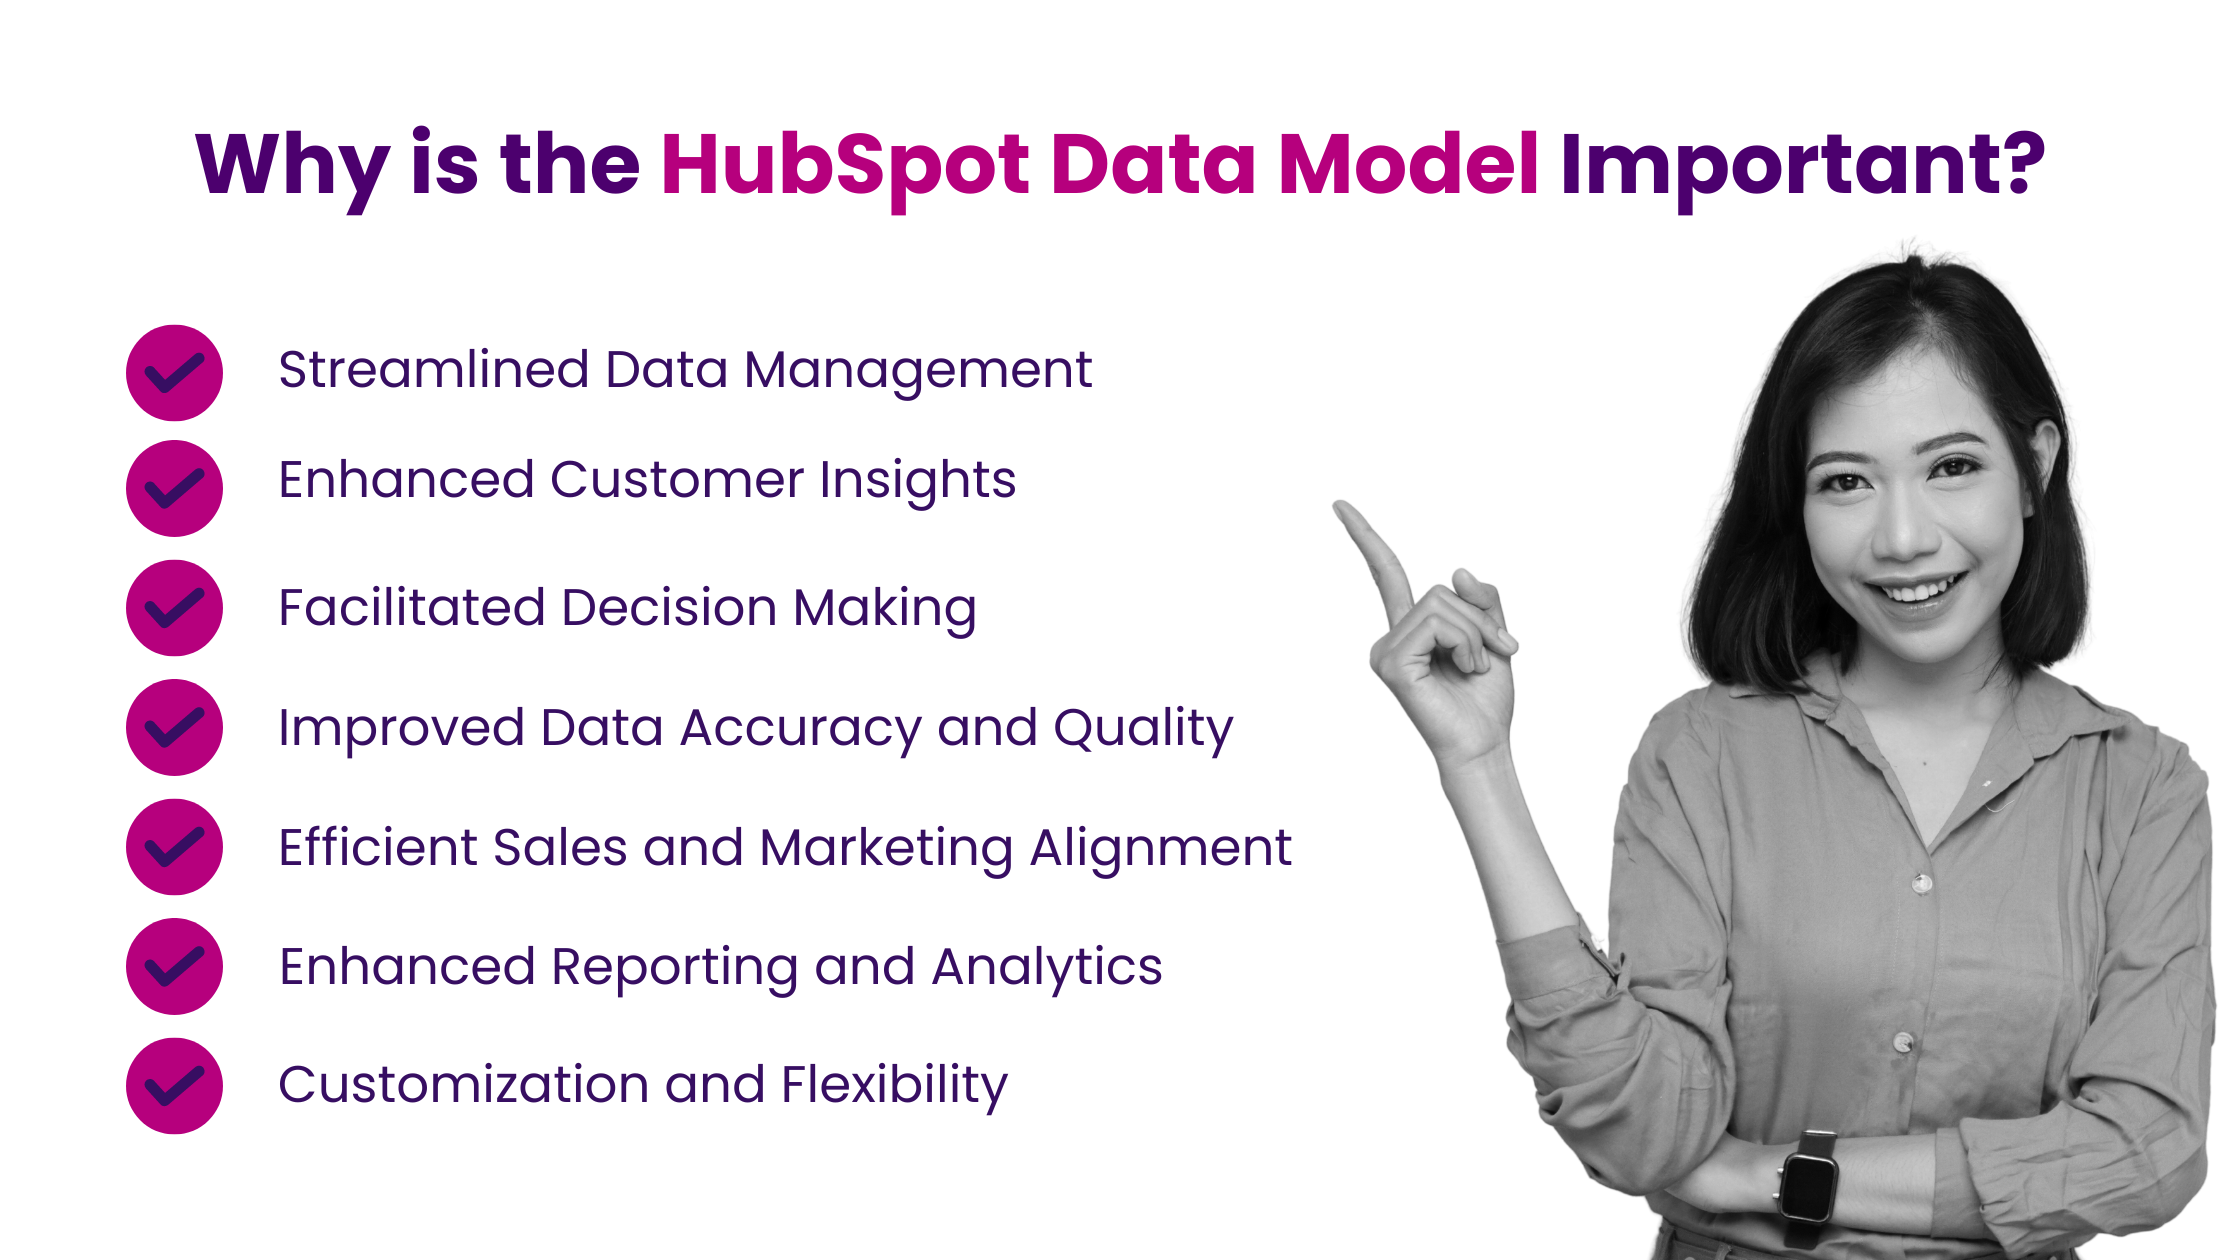 Why is the HubSpot Data Model Important